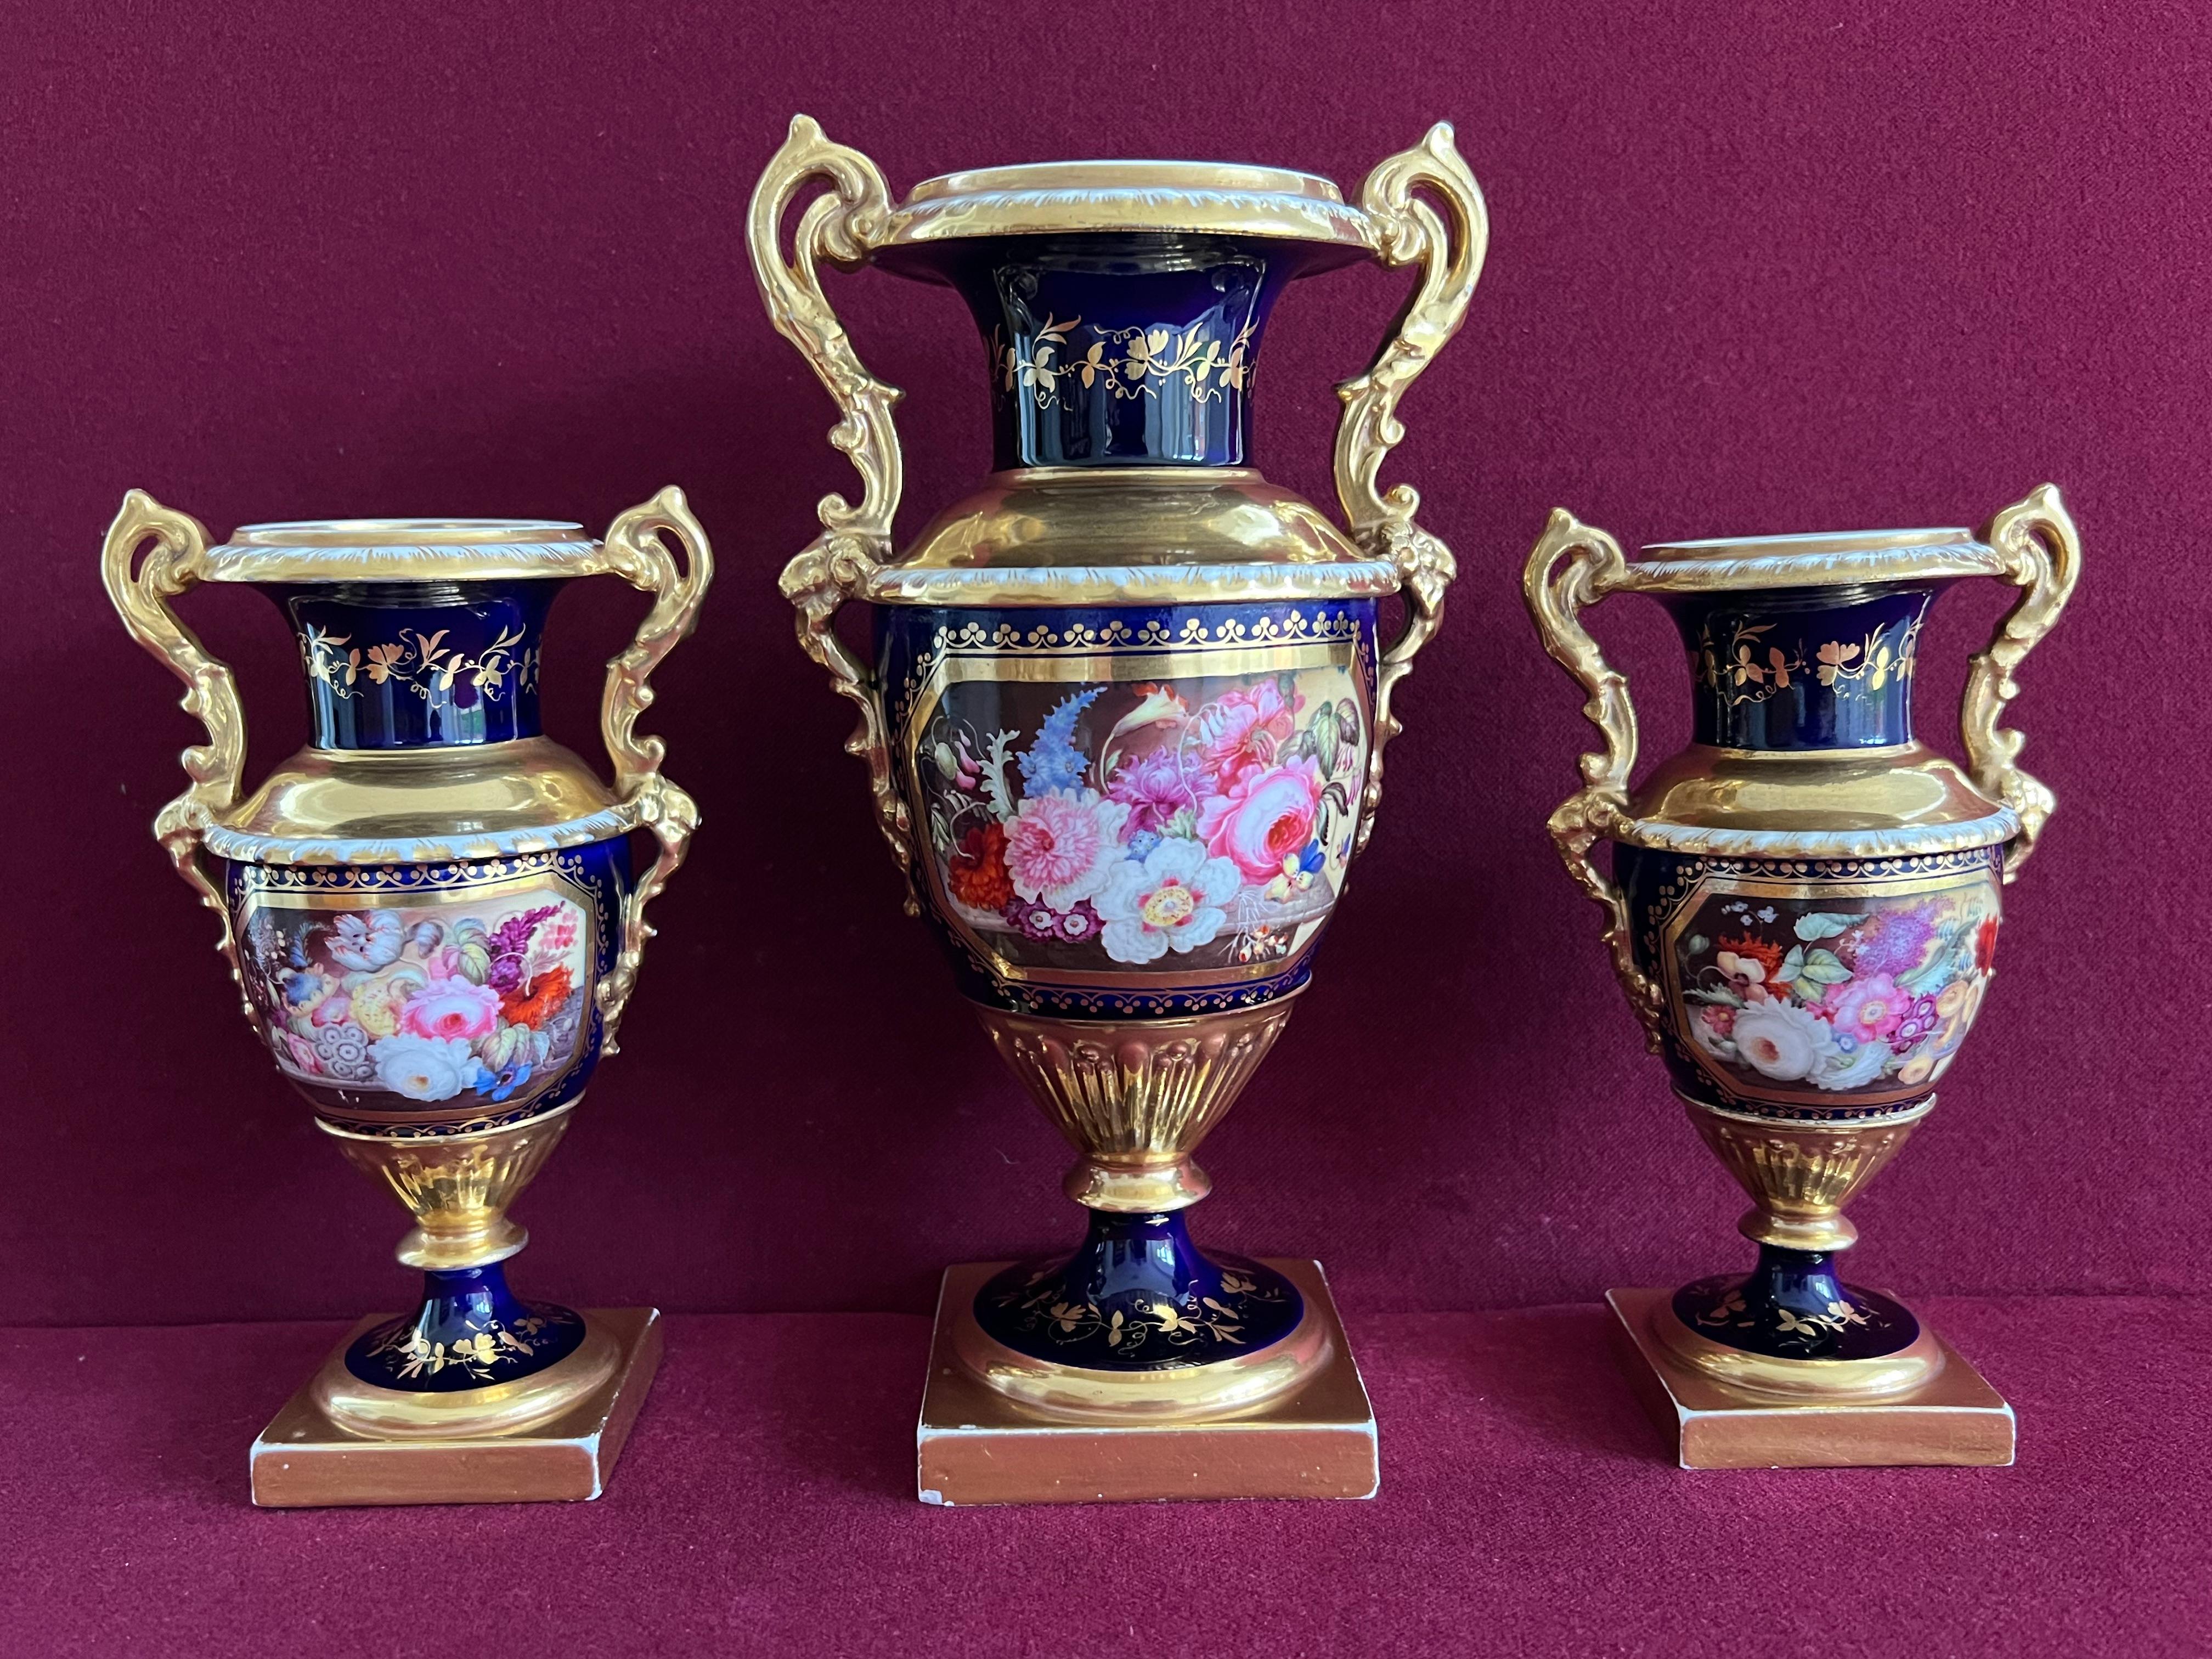 A Garniture of Minton Porcelain Vases decorated by Thomas Steele c1830. Each vase of 'Elgin' shape, finely decorated with a well executed panel of flowers on a marble table by Thomas Steel. Marks: + sign on a circle in gold.

Condition: A few small